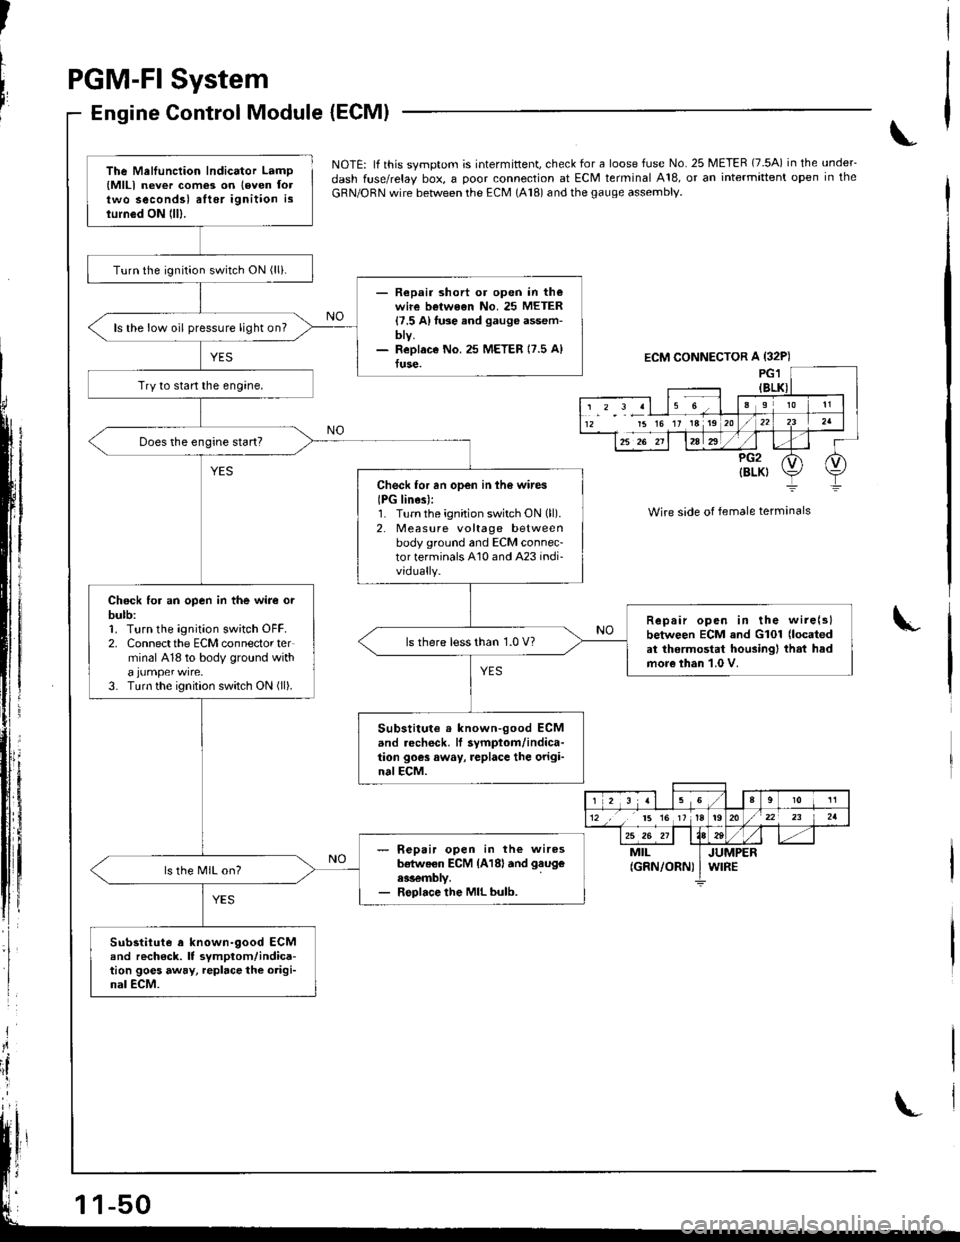 HONDA INTEGRA 1998 4.G Workshop Manual I
I
It:
PGM-FI System
Engine Control Module {ECMI
,i
I
{
ili
NOTE: lf this svmotom is intermittent, check for a loose fuse No. 25 METER (7.5A) in the under_
dash fuse/relay box, a ooor connection at E